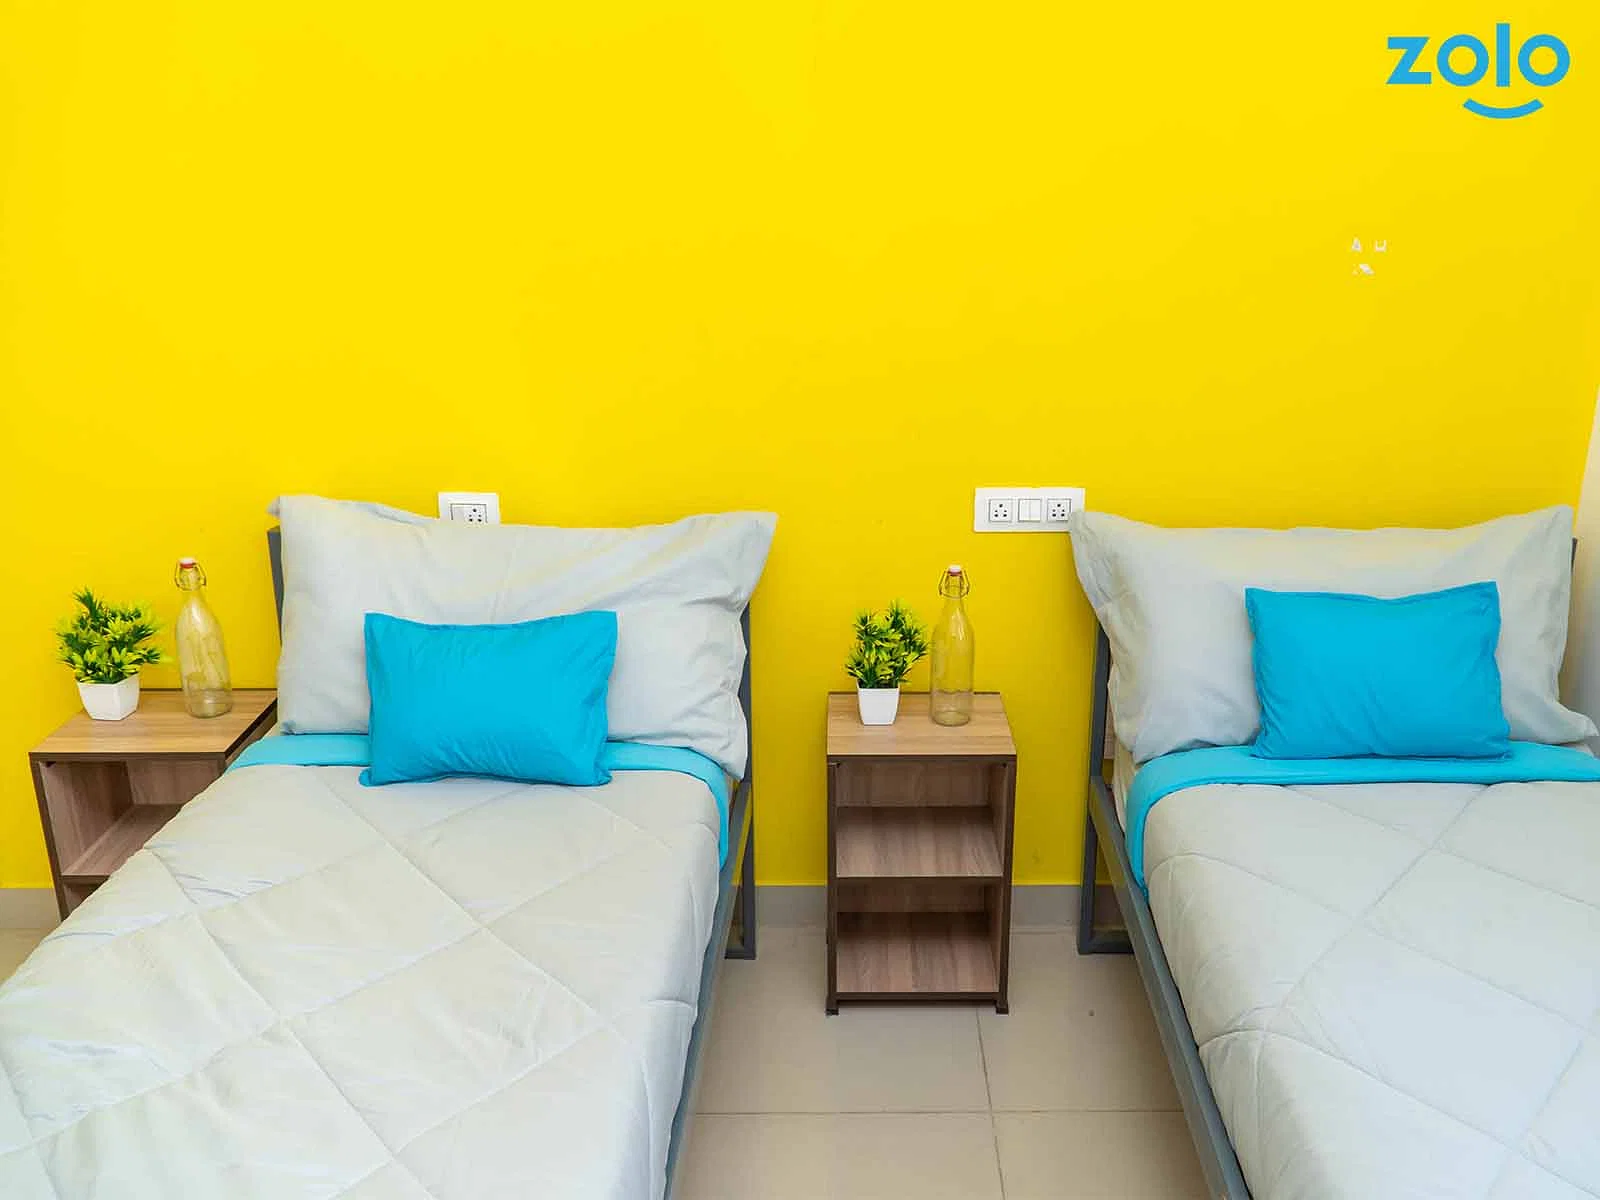 Affordable single rooms for students and working professionals in Sarjapura-Bangalore-Zolo Estonia C